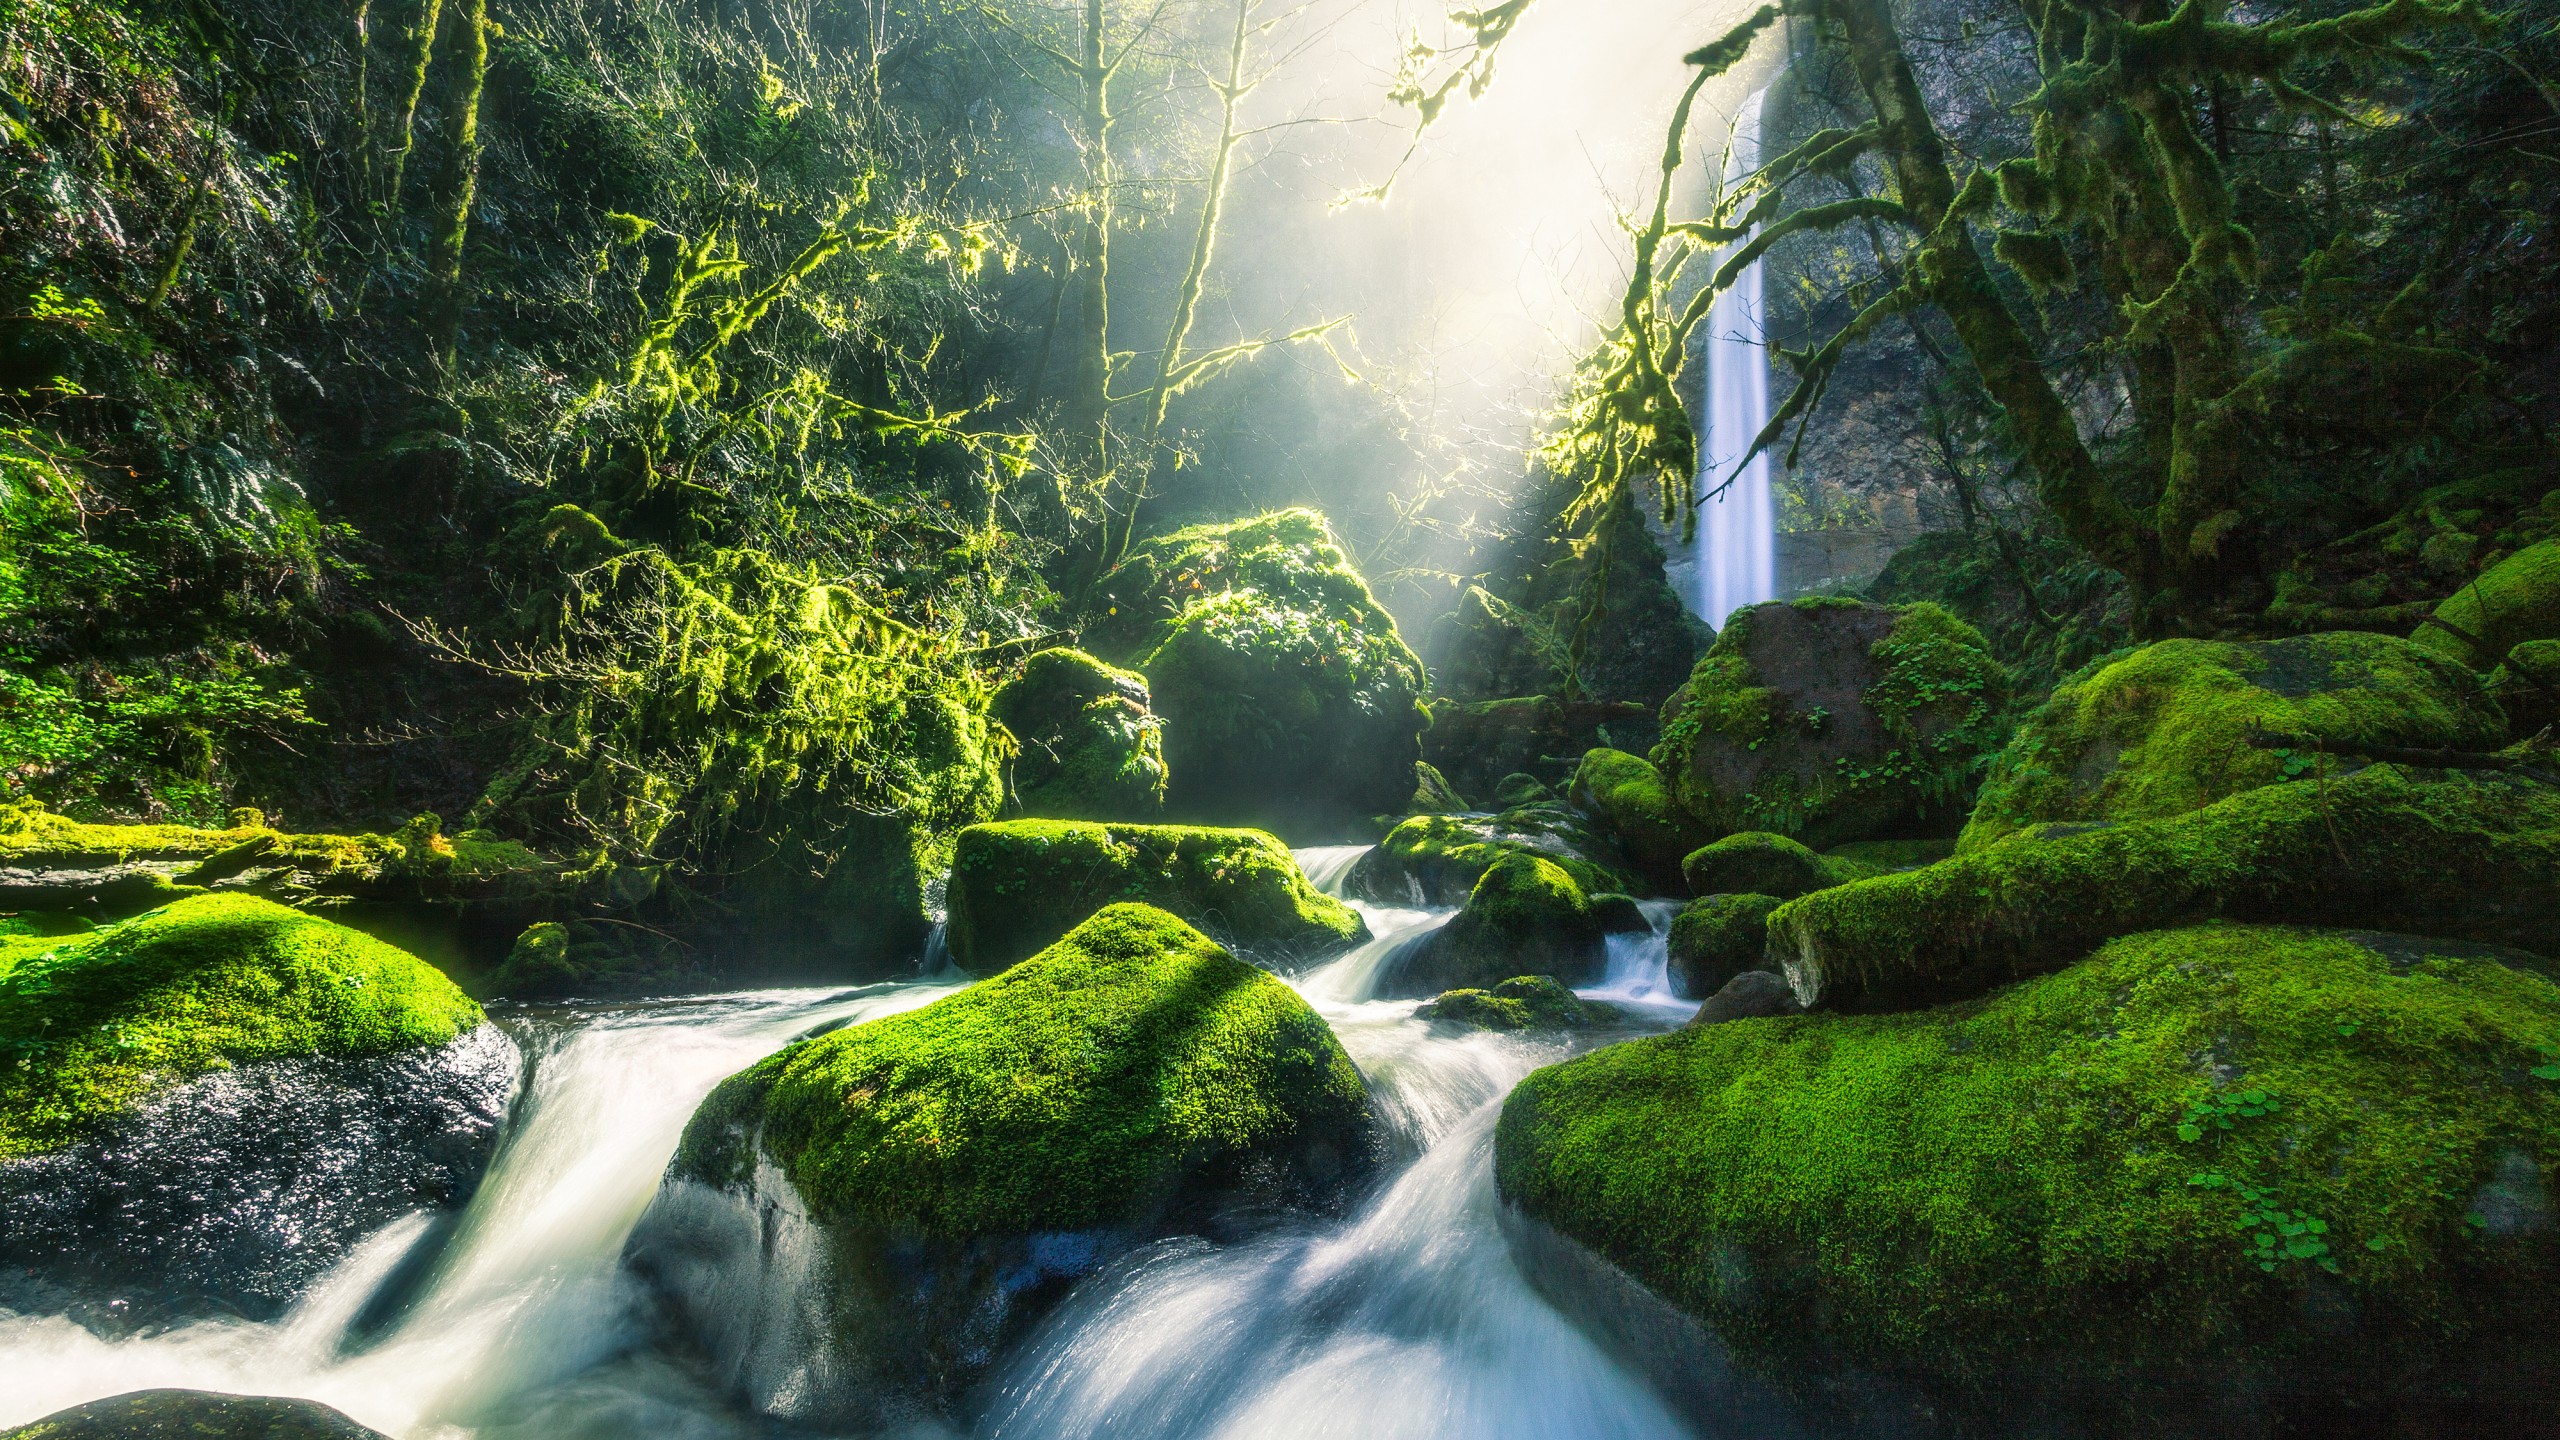 4k forest wallpaper,natural landscape,nature,water resources,body of water,vegetation